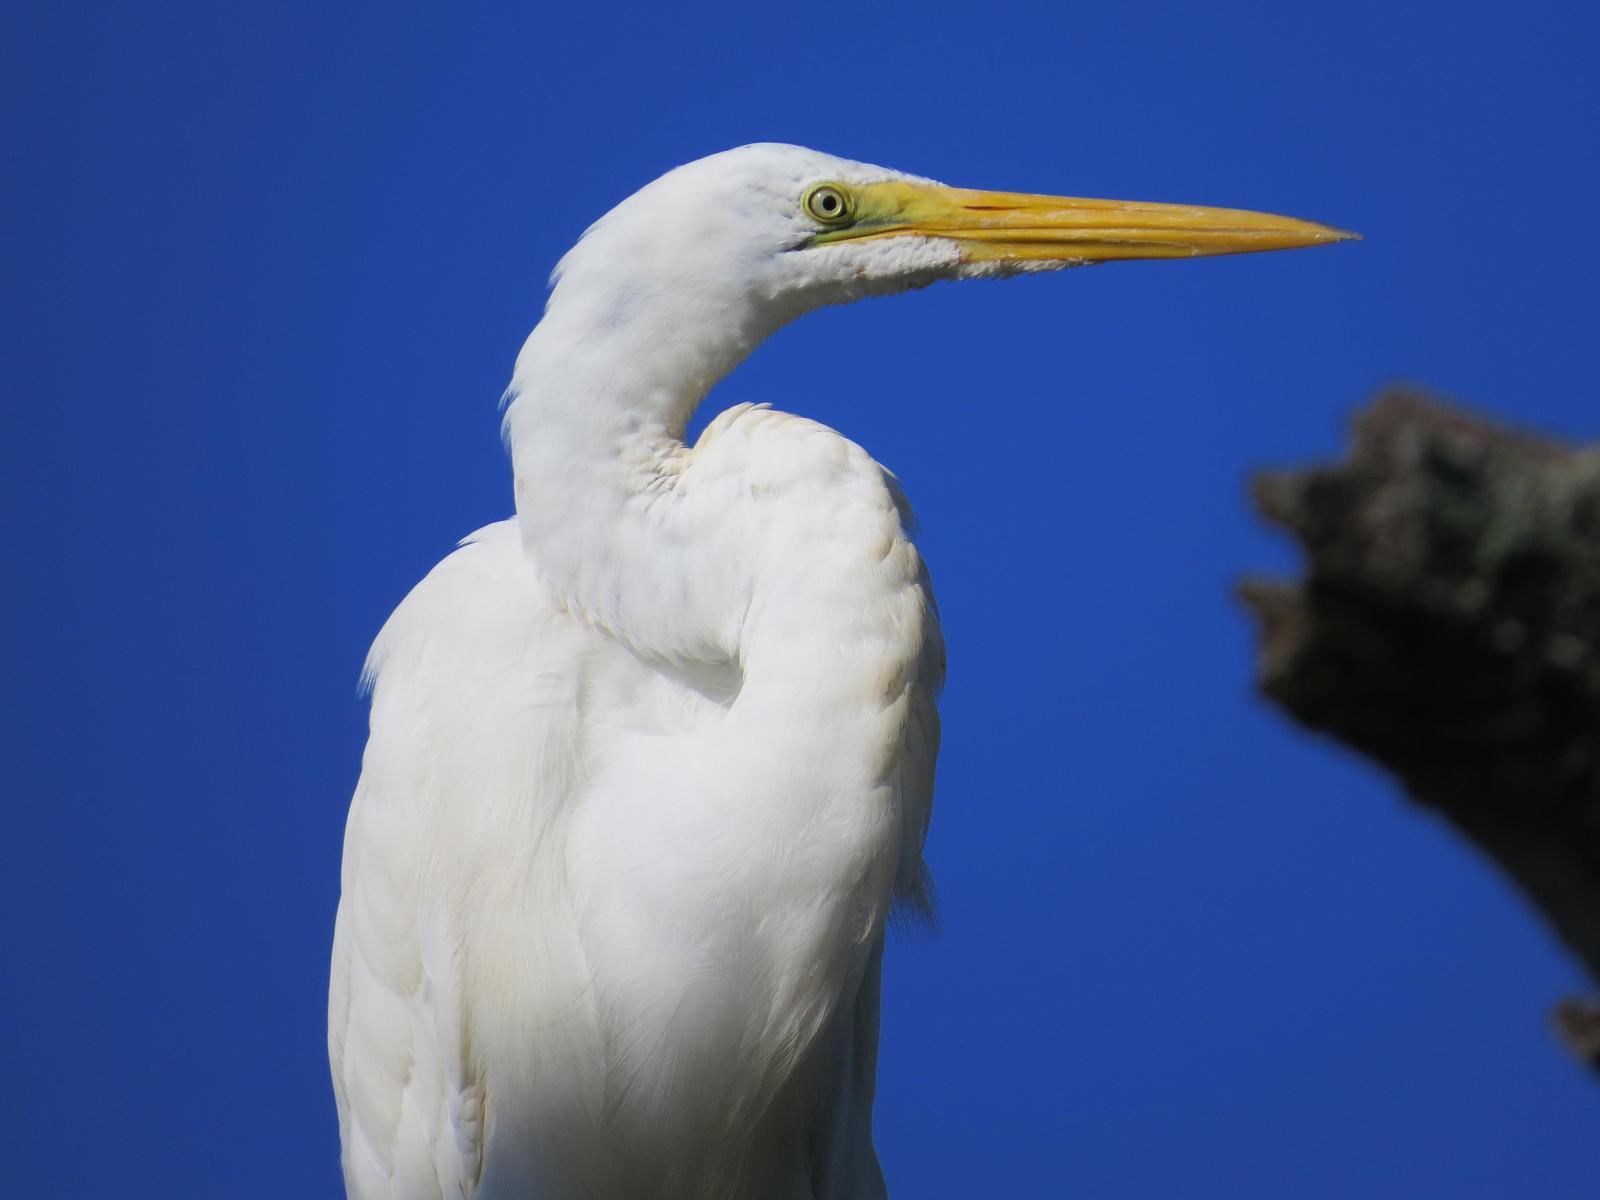 Great Egret Photo by Kathy Wooding